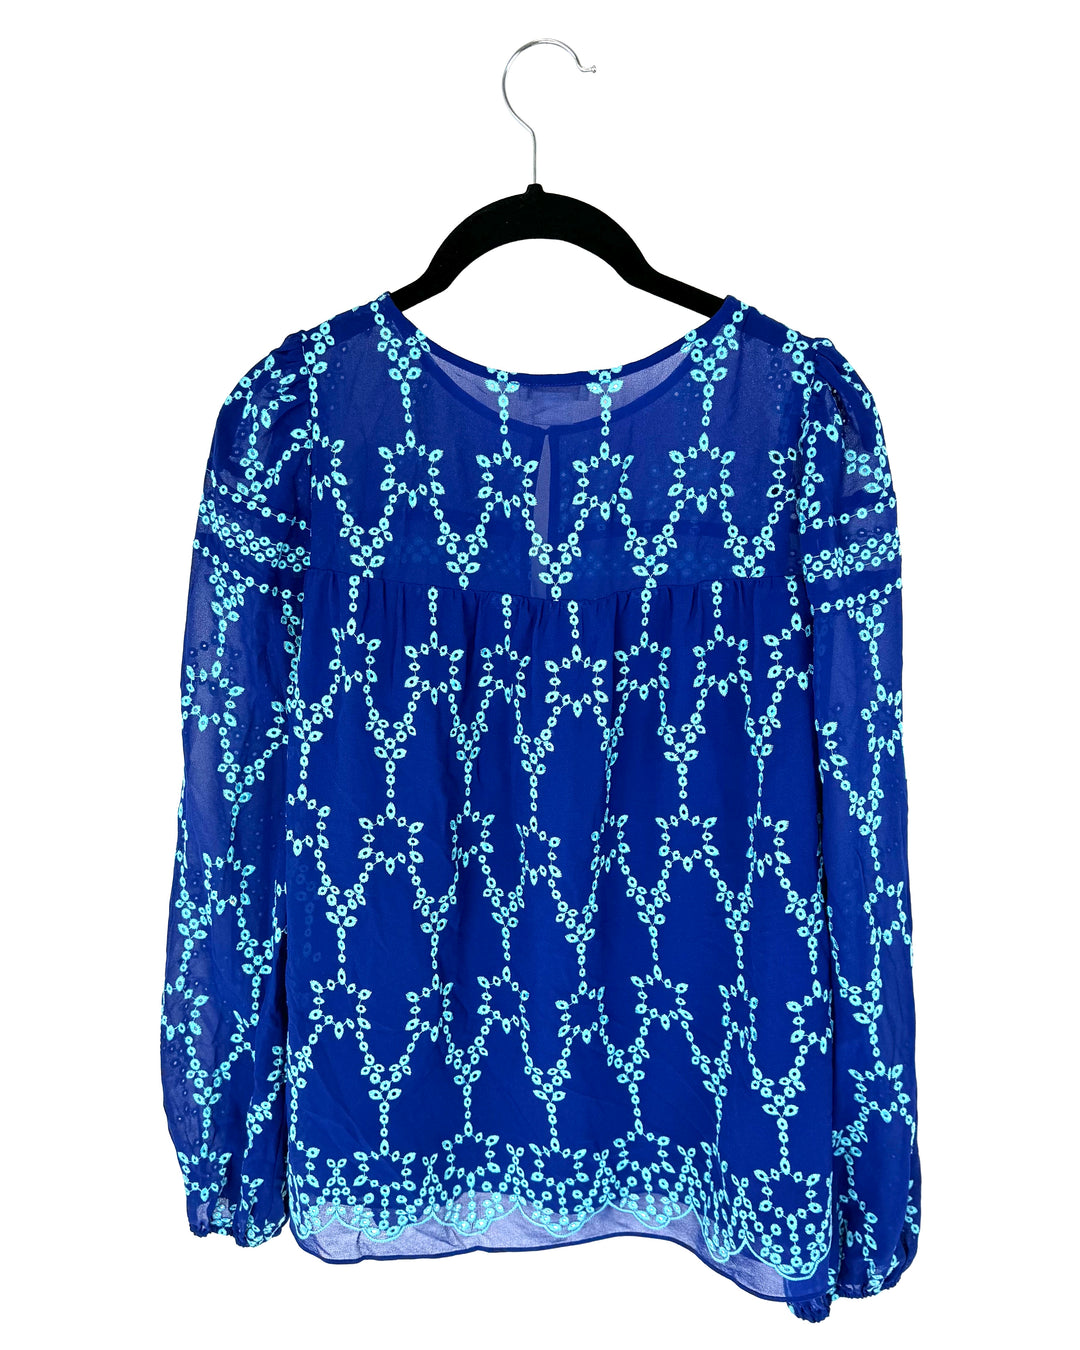 Blue Embroidered Blouse - Small and Medium